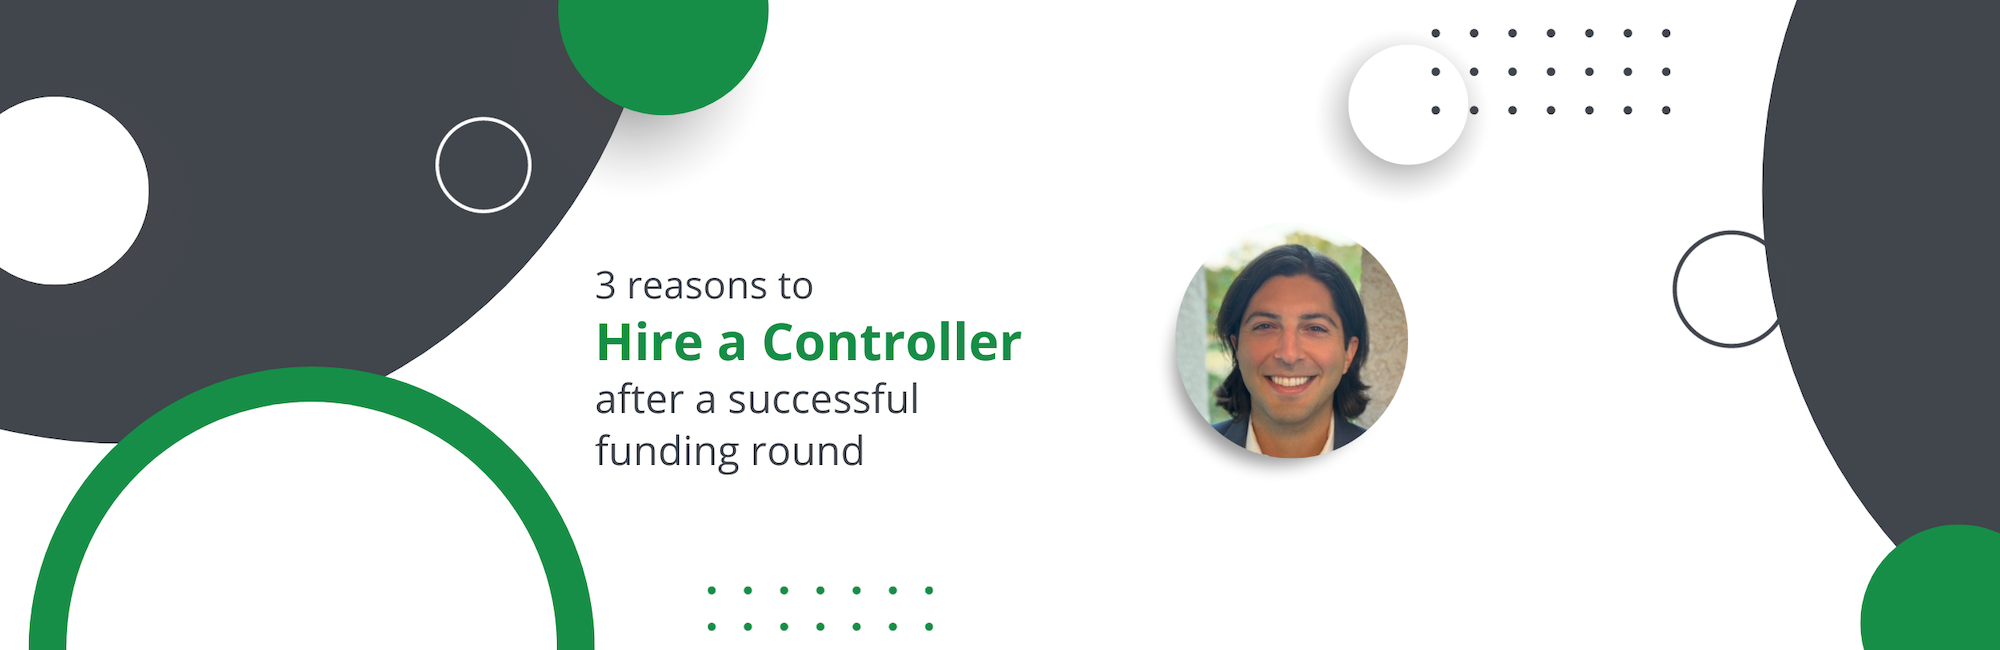 3 Reasons to Hire a Controller by Chris Ciani